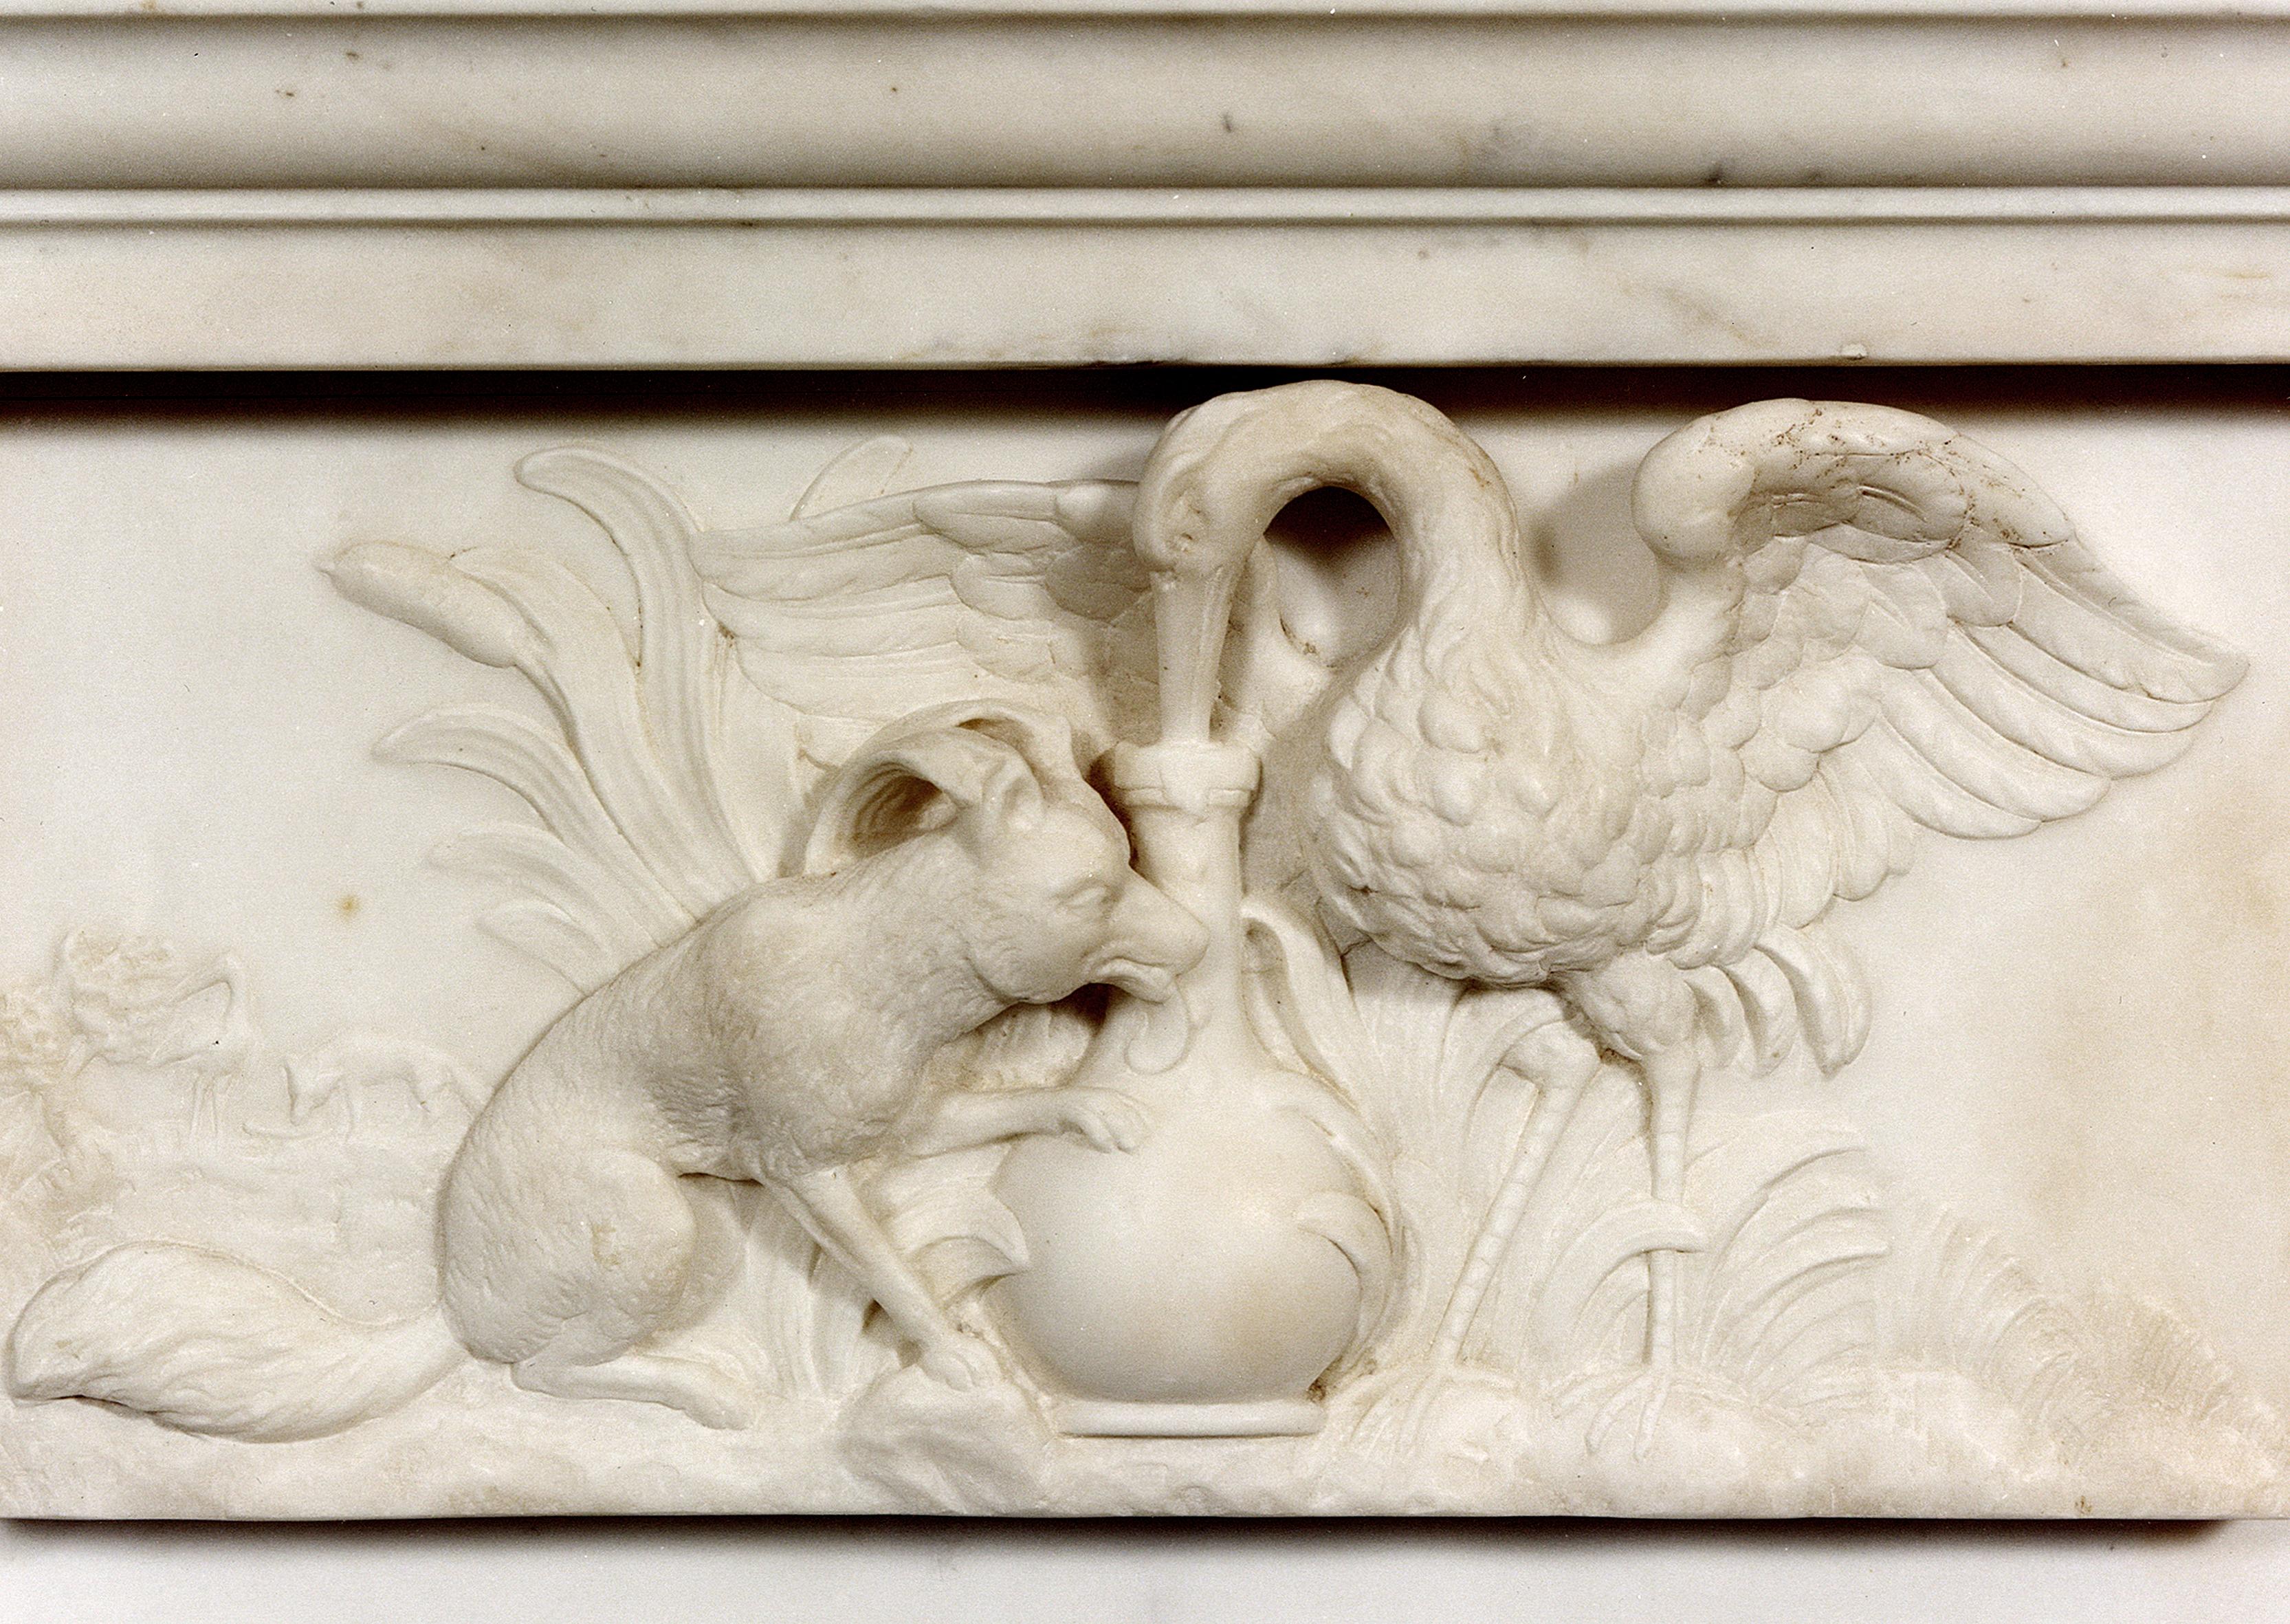 An unusual English marble fireplace with beautifully carved Aesops fable centre panel depicting the story of the Fox and the Stalk. The frieze with arched and dart detailing, with sweeping moulded bracketed jambs, 19th century with a Georgian